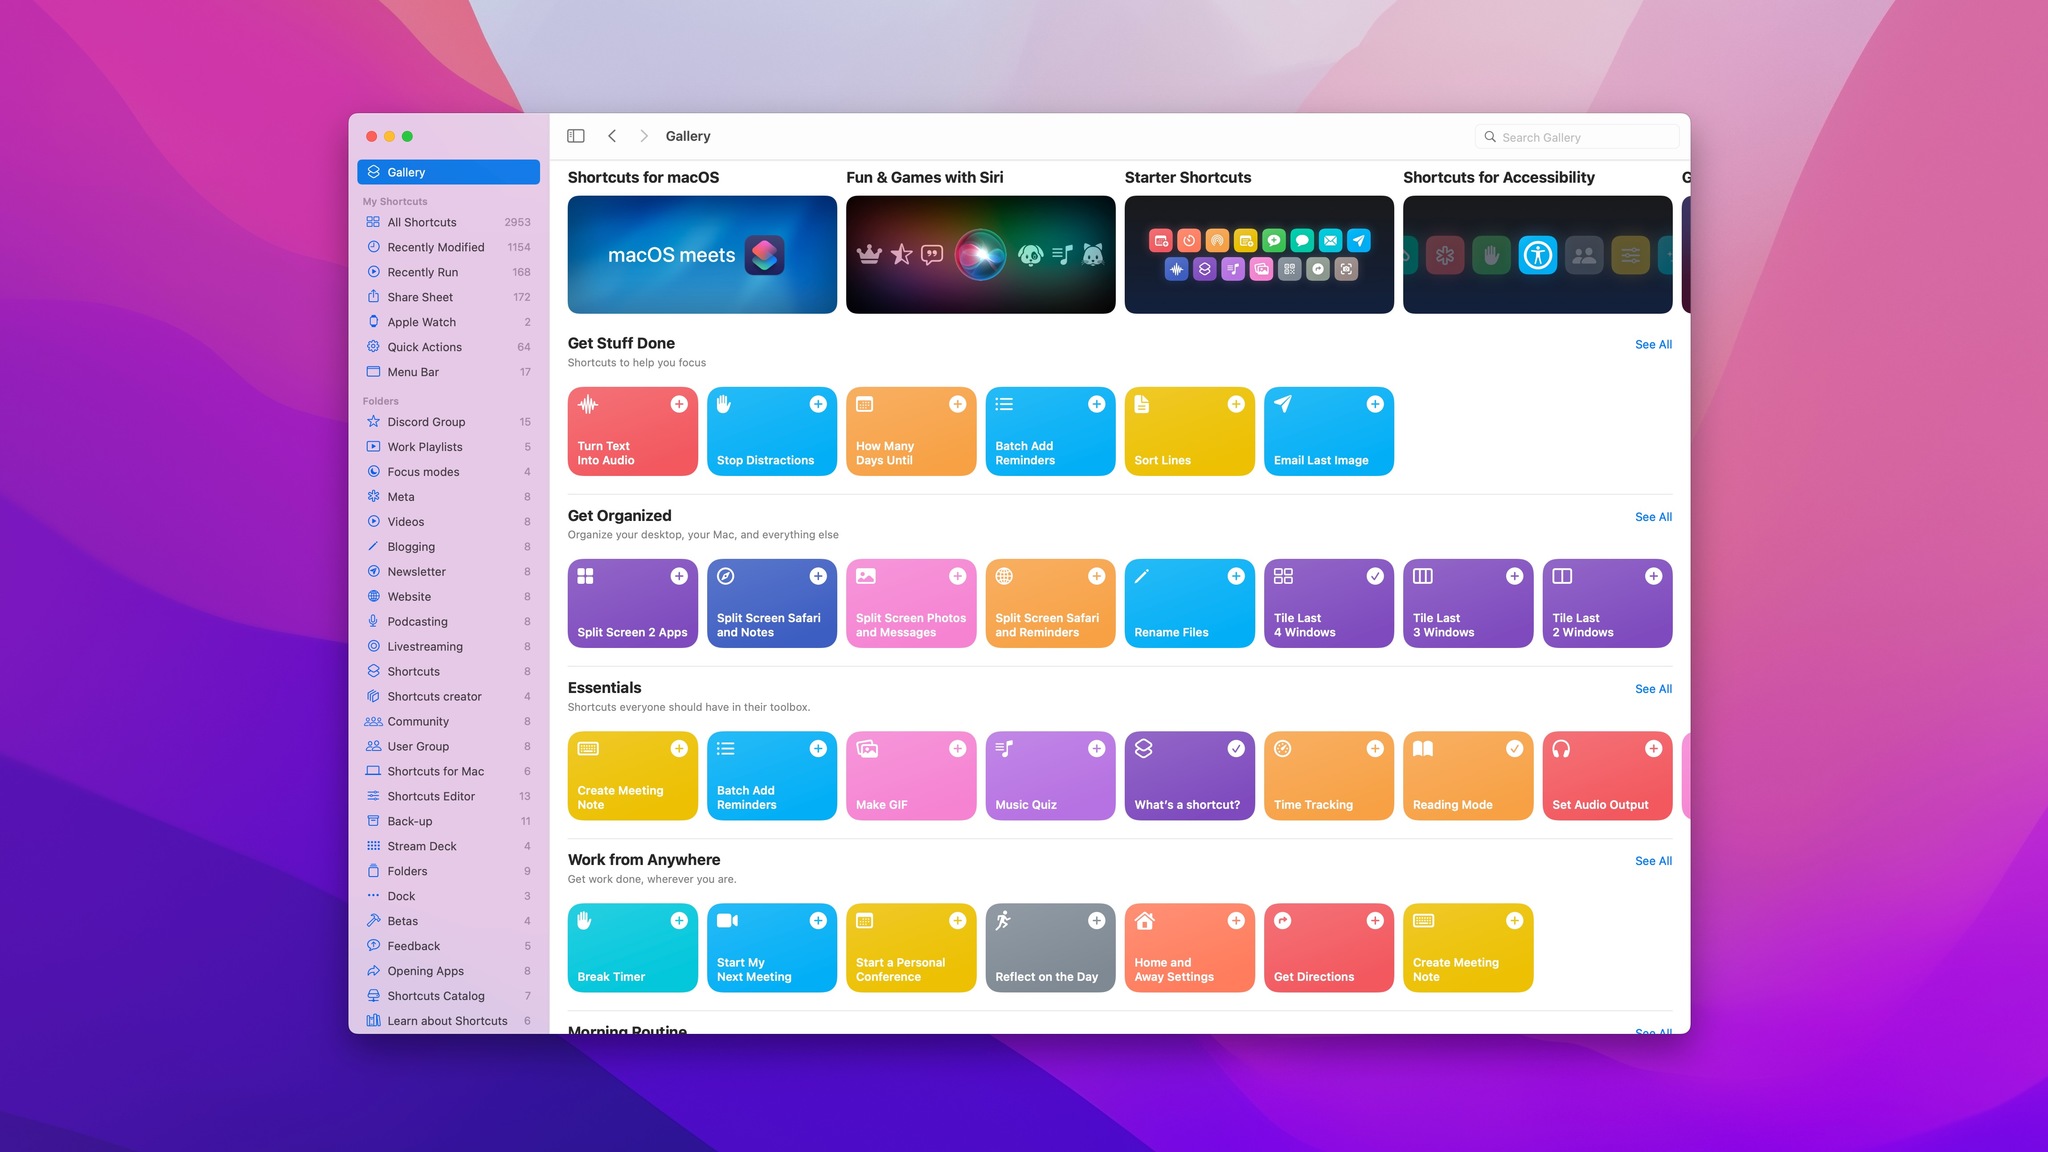 Screenshot of the Gallery displayed for Shortcuts for Mac.